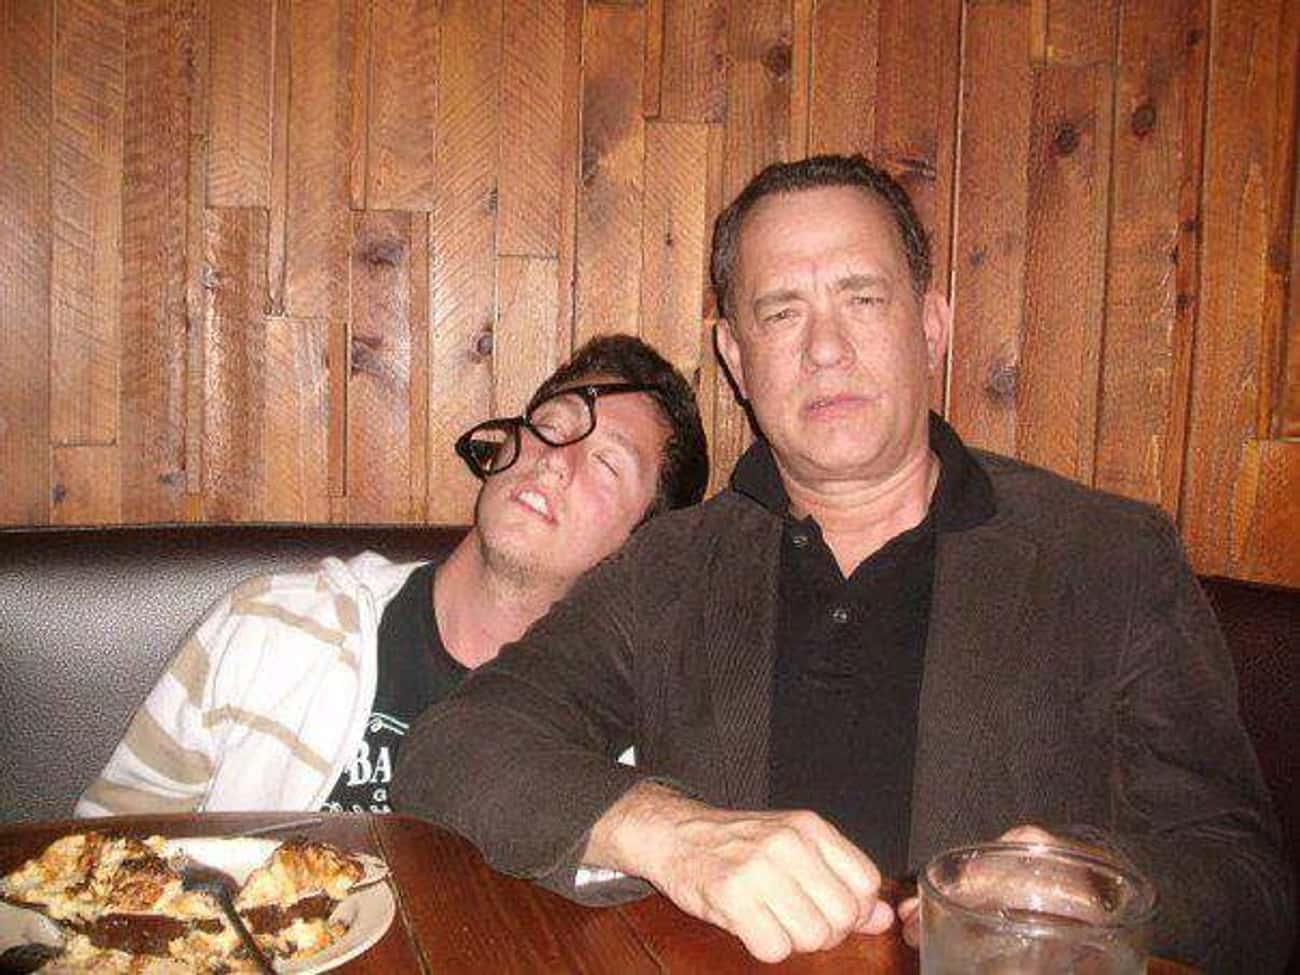 Don't Sleep Or Tom Hanks Will Get You